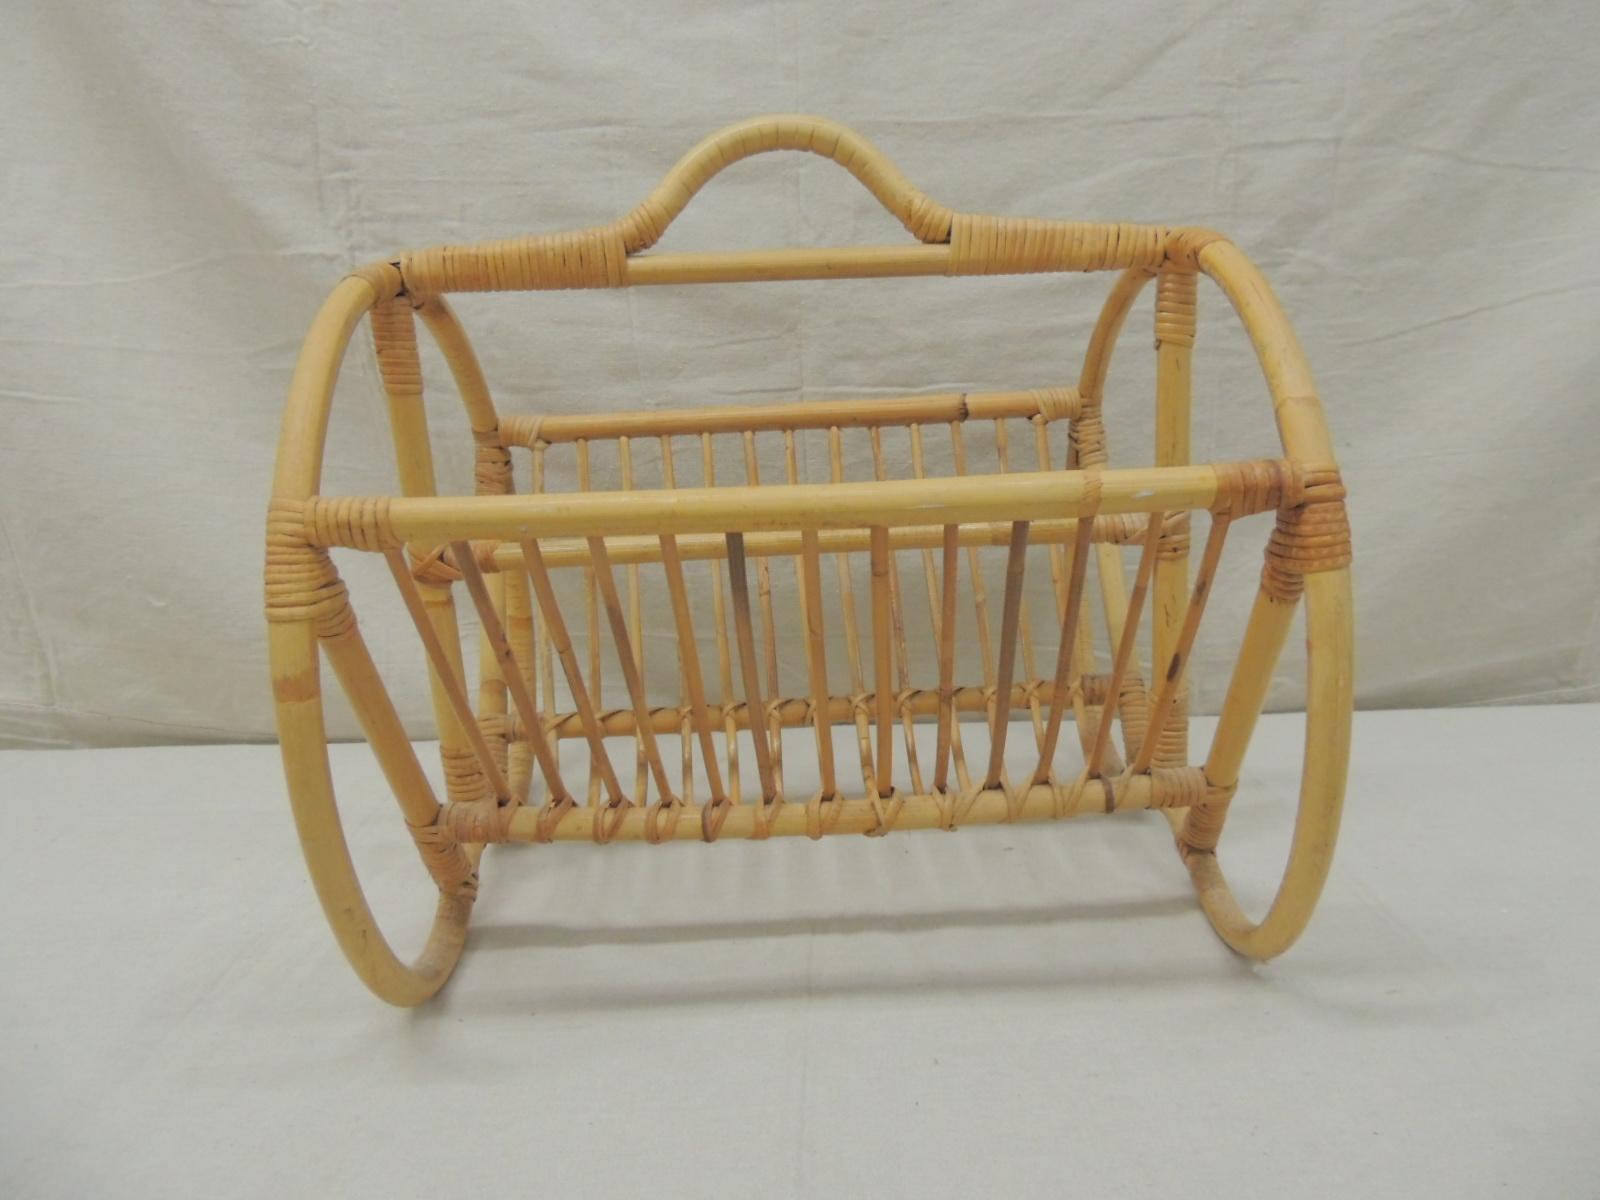 Vintage bamboo and rattan magazine holder or rack
(Hong Kong)
Size: 16”W X x 15” D x 16.5” H.
   